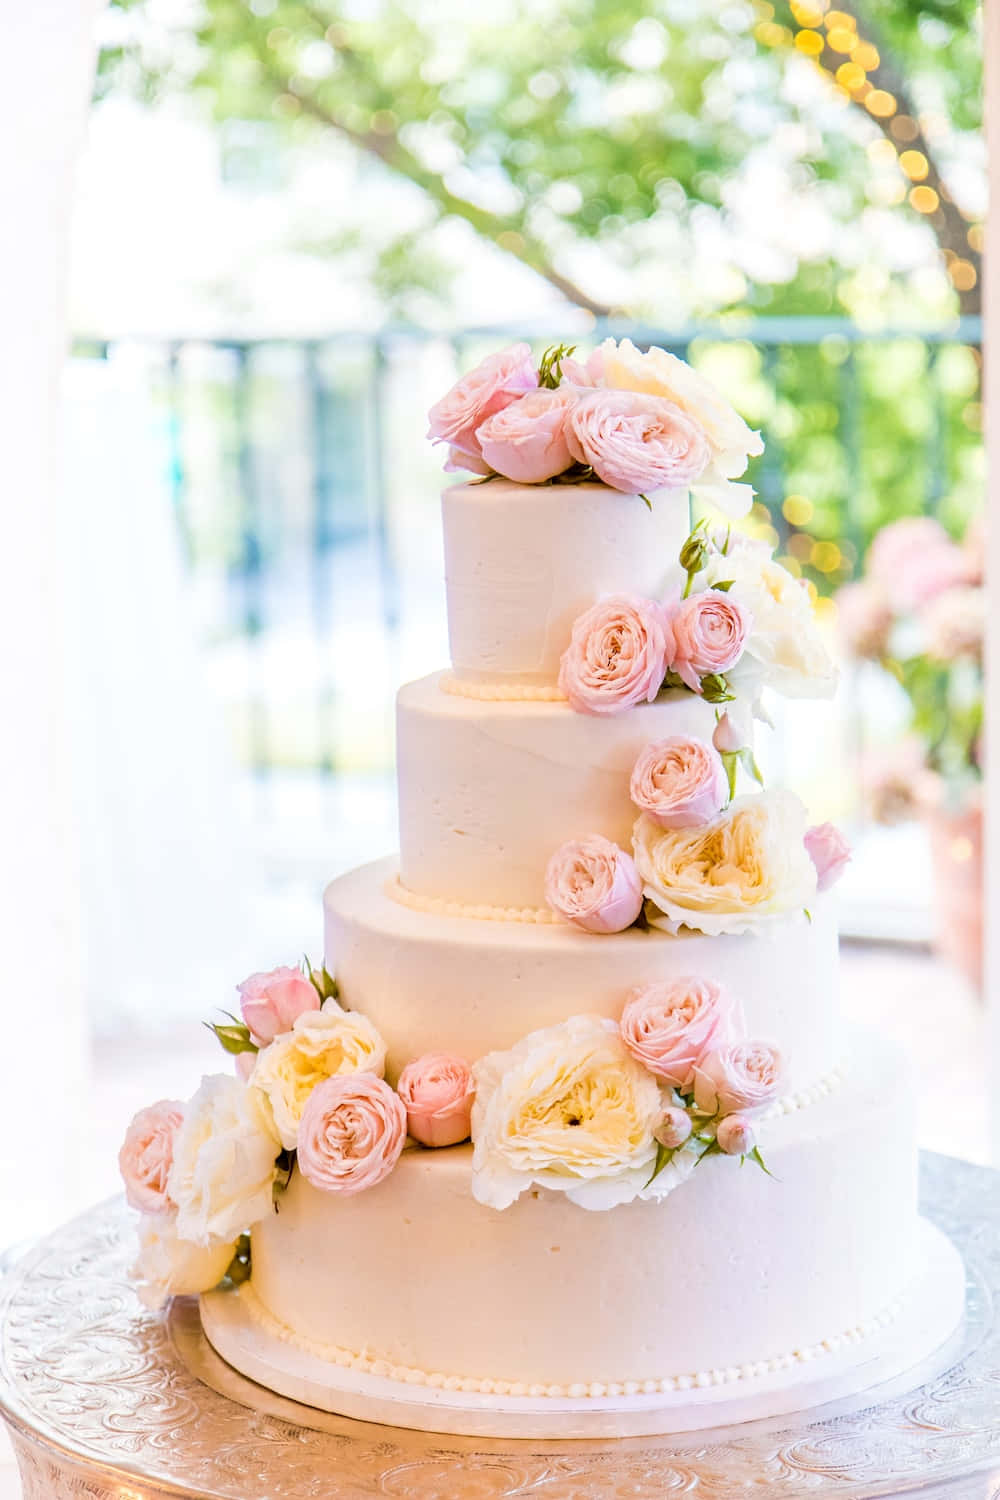 A White Wedding Cake With Pink Roses On Top